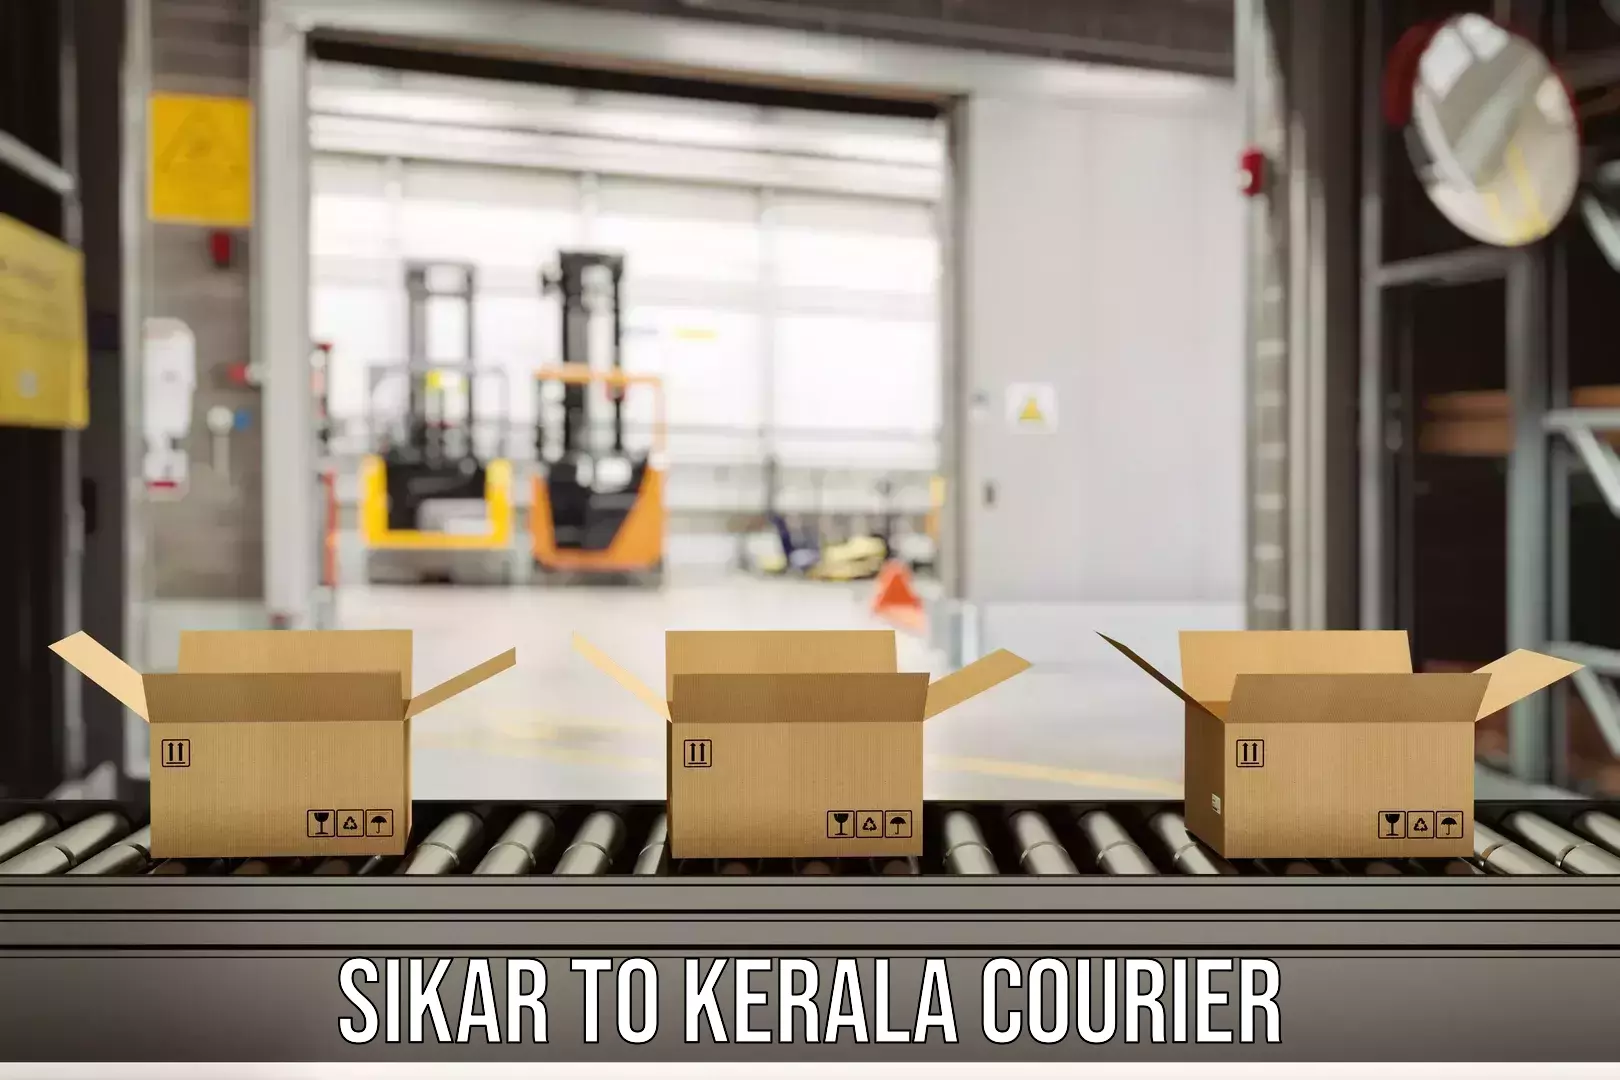 Express delivery network Sikar to Kannur